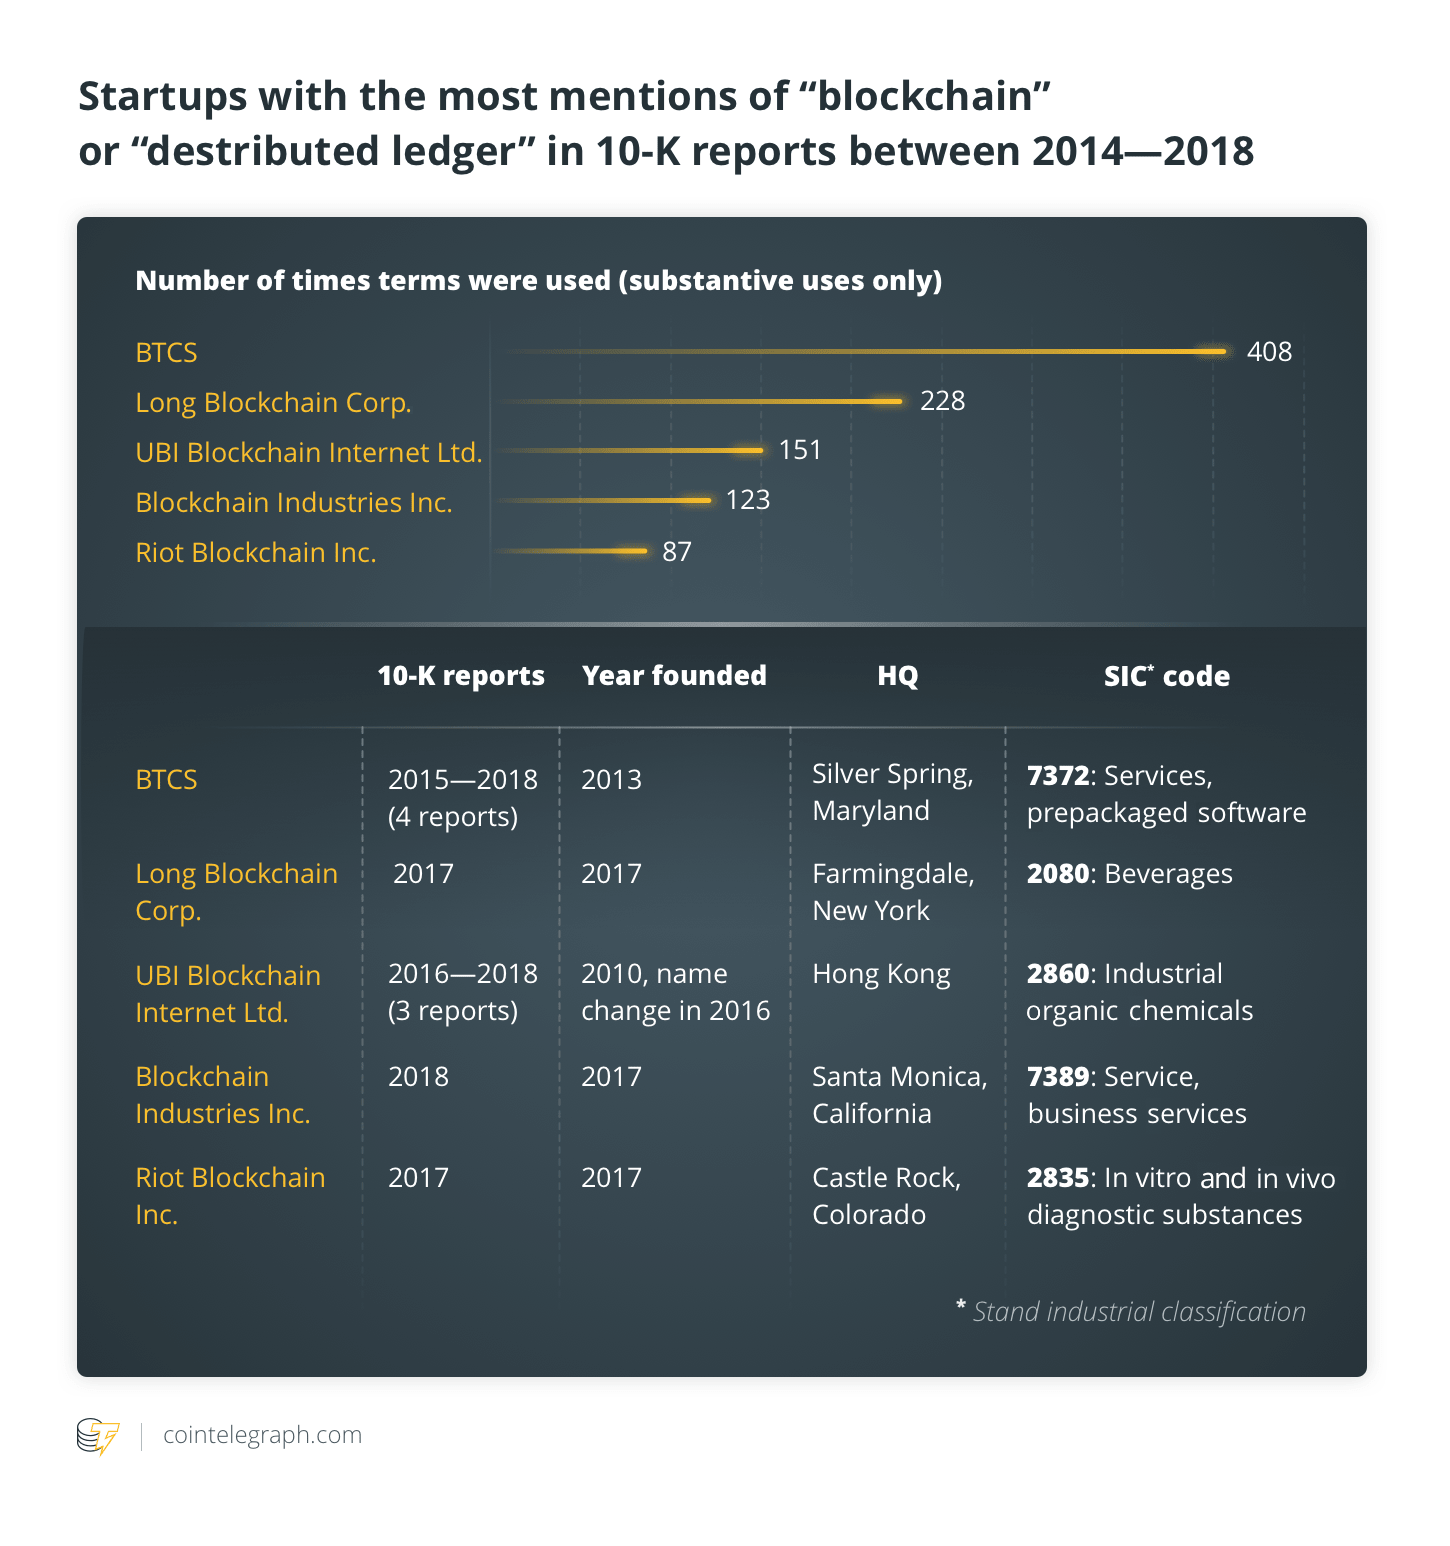 Startups with the most mentions of "blockchain" or "desrtibuted ledger" in 10-K reports between 2014—2018